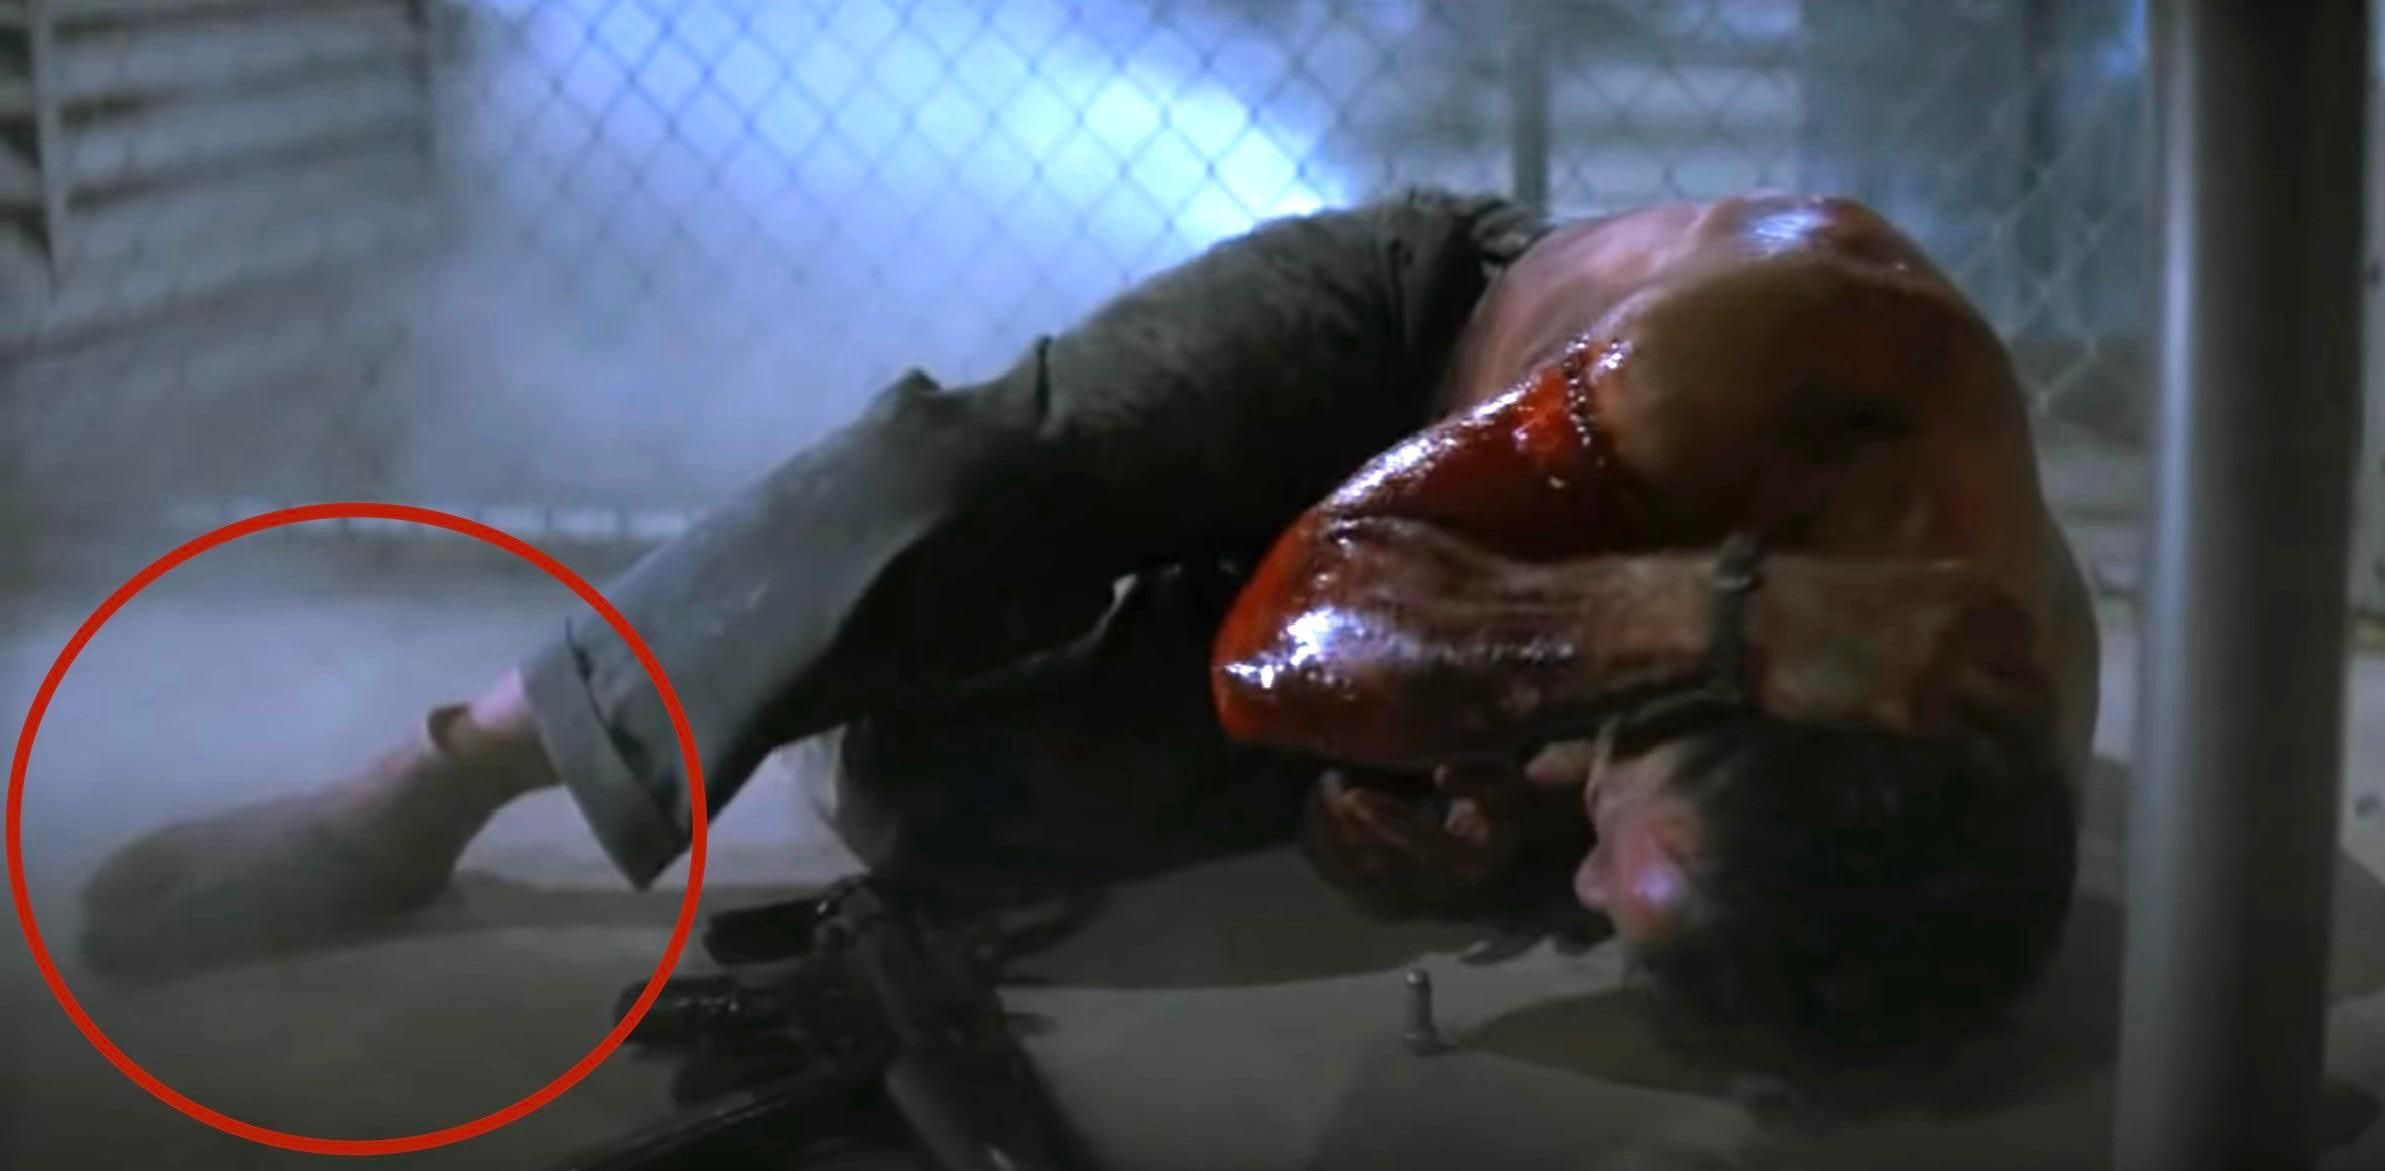 In Die Hard , Bruce Willis is wearing shoes designed to look like his own bare feet and can be seen in certain shots of the film